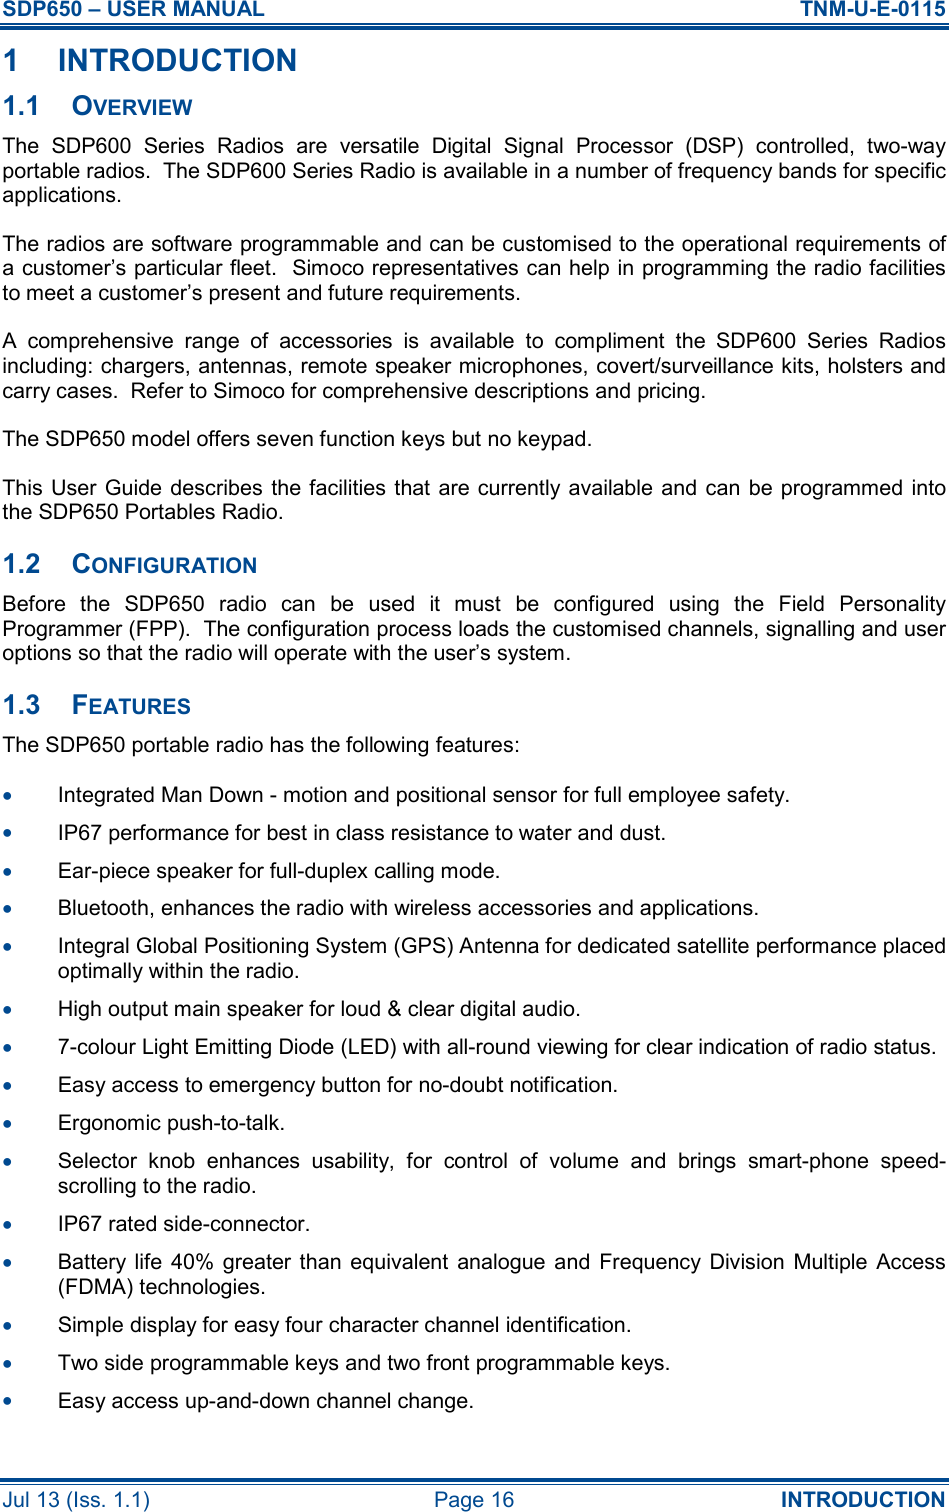 SDP650 – USER MANUAL  TNM-U-E-0115 Jul 13 (Iss. 1.1)  Page 16  INTRODUCTION 1  INTRODUCTION 1.1  OVERVIEW The  SDP600  Series  Radios  are  versatile  Digital  Signal  Processor  (DSP)  controlled,  two-way portable radios.  The SDP600 Series Radio is available in a number of frequency bands for specific applications. The radios are software programmable and can be customised to the operational requirements of a customer’s particular fleet.  Simoco representatives can help in programming the radio facilities to meet a customer’s present and future requirements. A  comprehensive  range  of  accessories  is  available  to  compliment  the  SDP600  Series  Radios including: chargers, antennas, remote speaker microphones, covert/surveillance kits, holsters and carry cases.  Refer to Simoco for comprehensive descriptions and pricing. The SDP650 model offers seven function keys but no keypad. This User Guide describes the facilities that are currently available and  can  be programmed into the SDP650 Portables Radio. 1.2  CONFIGURATION Before  the  SDP650  radio  can  be  used  it  must  be  configured  using  the  Field  Personality Programmer (FPP).  The configuration process loads the customised channels, signalling and user options so that the radio will operate with the user’s system. 1.3  FEATURES The SDP650 portable radio has the following features: •  Integrated Man Down - motion and positional sensor for full employee safety. •  IP67 performance for best in class resistance to water and dust. •  Ear-piece speaker for full-duplex calling mode. •  Bluetooth, enhances the radio with wireless accessories and applications. •  Integral Global Positioning System (GPS) Antenna for dedicated satellite performance placed optimally within the radio. •  High output main speaker for loud &amp; clear digital audio. •  7-colour Light Emitting Diode (LED) with all-round viewing for clear indication of radio status. •  Easy access to emergency button for no-doubt notification. •  Ergonomic push-to-talk. •  Selector  knob  enhances  usability,  for  control  of  volume  and  brings  smart-phone  speed-scrolling to the radio. •  IP67 rated side-connector. •  Battery life  40%  greater  than equivalent  analogue  and  Frequency  Division  Multiple  Access (FDMA) technologies. •  Simple display for easy four character channel identification. •  Two side programmable keys and two front programmable keys. •  Easy access up-and-down channel change.  